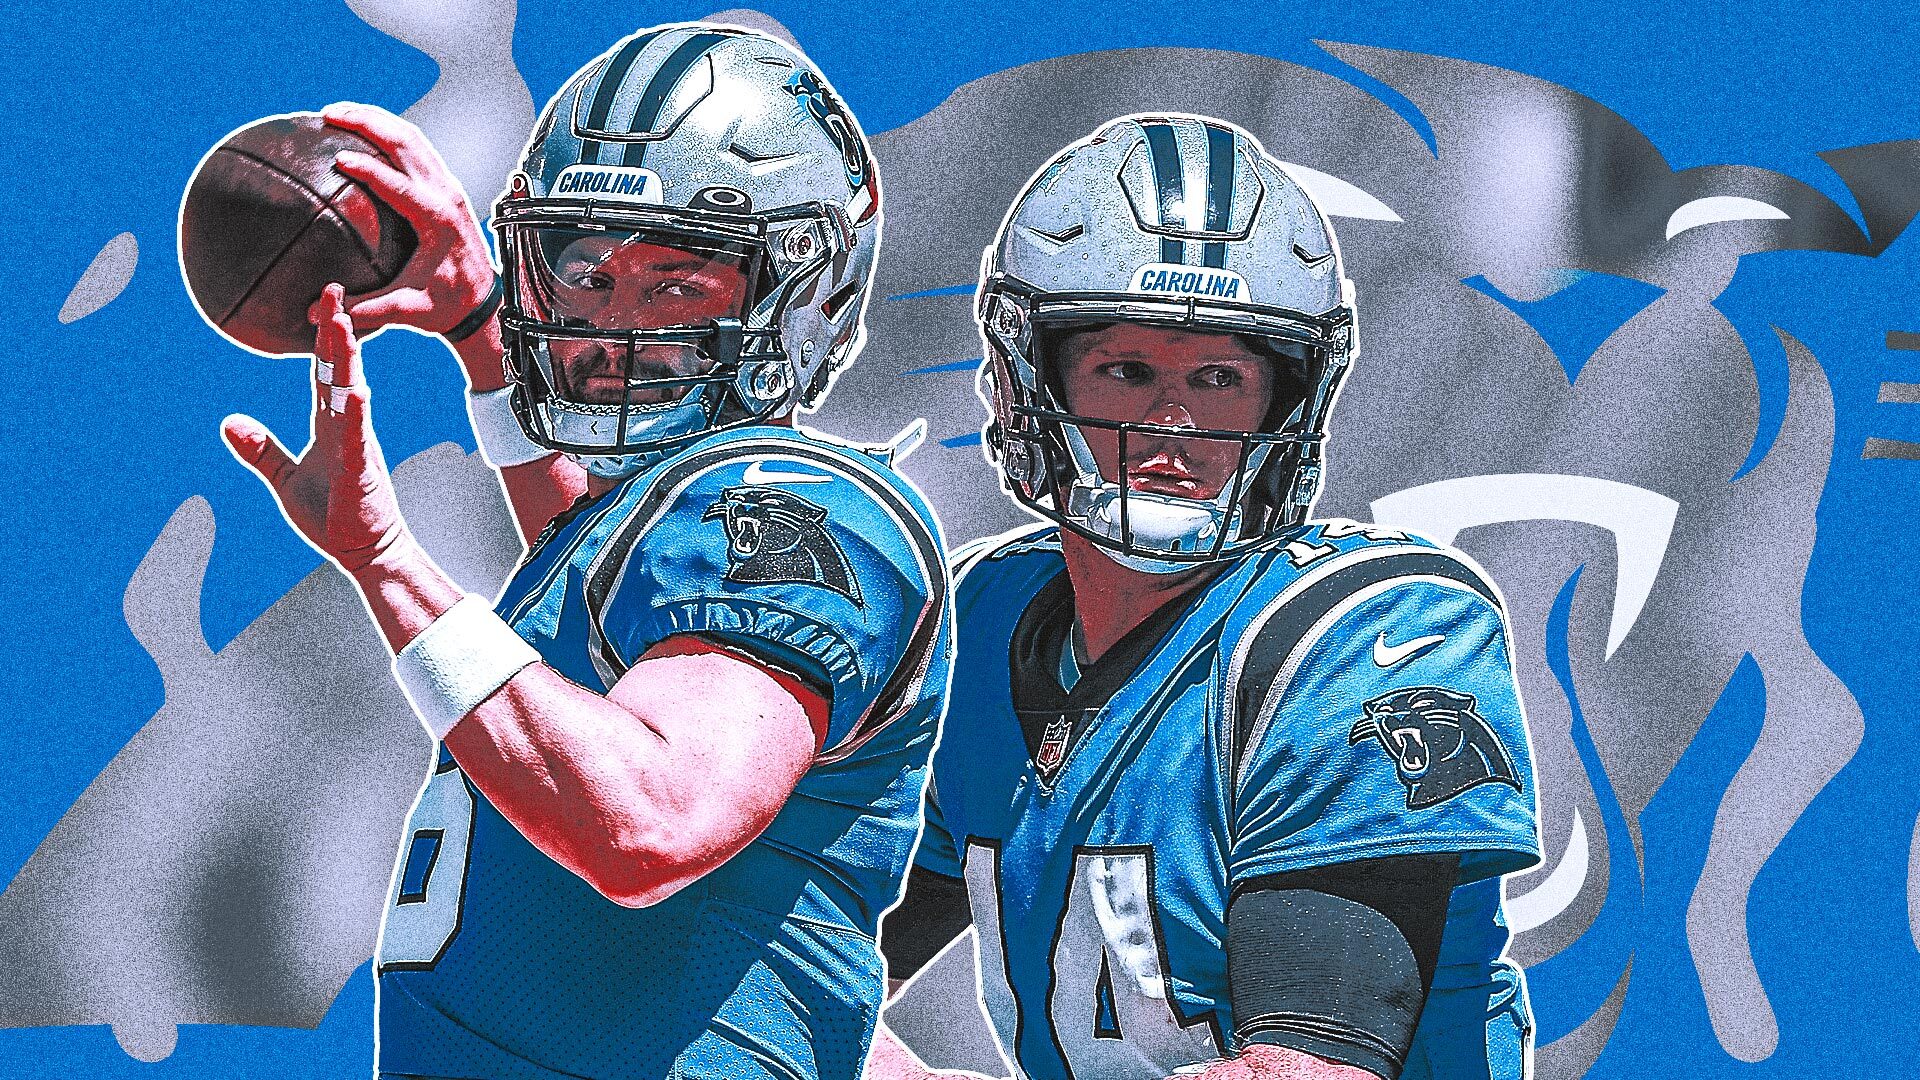 who are the carolina panthers playing tomorrow